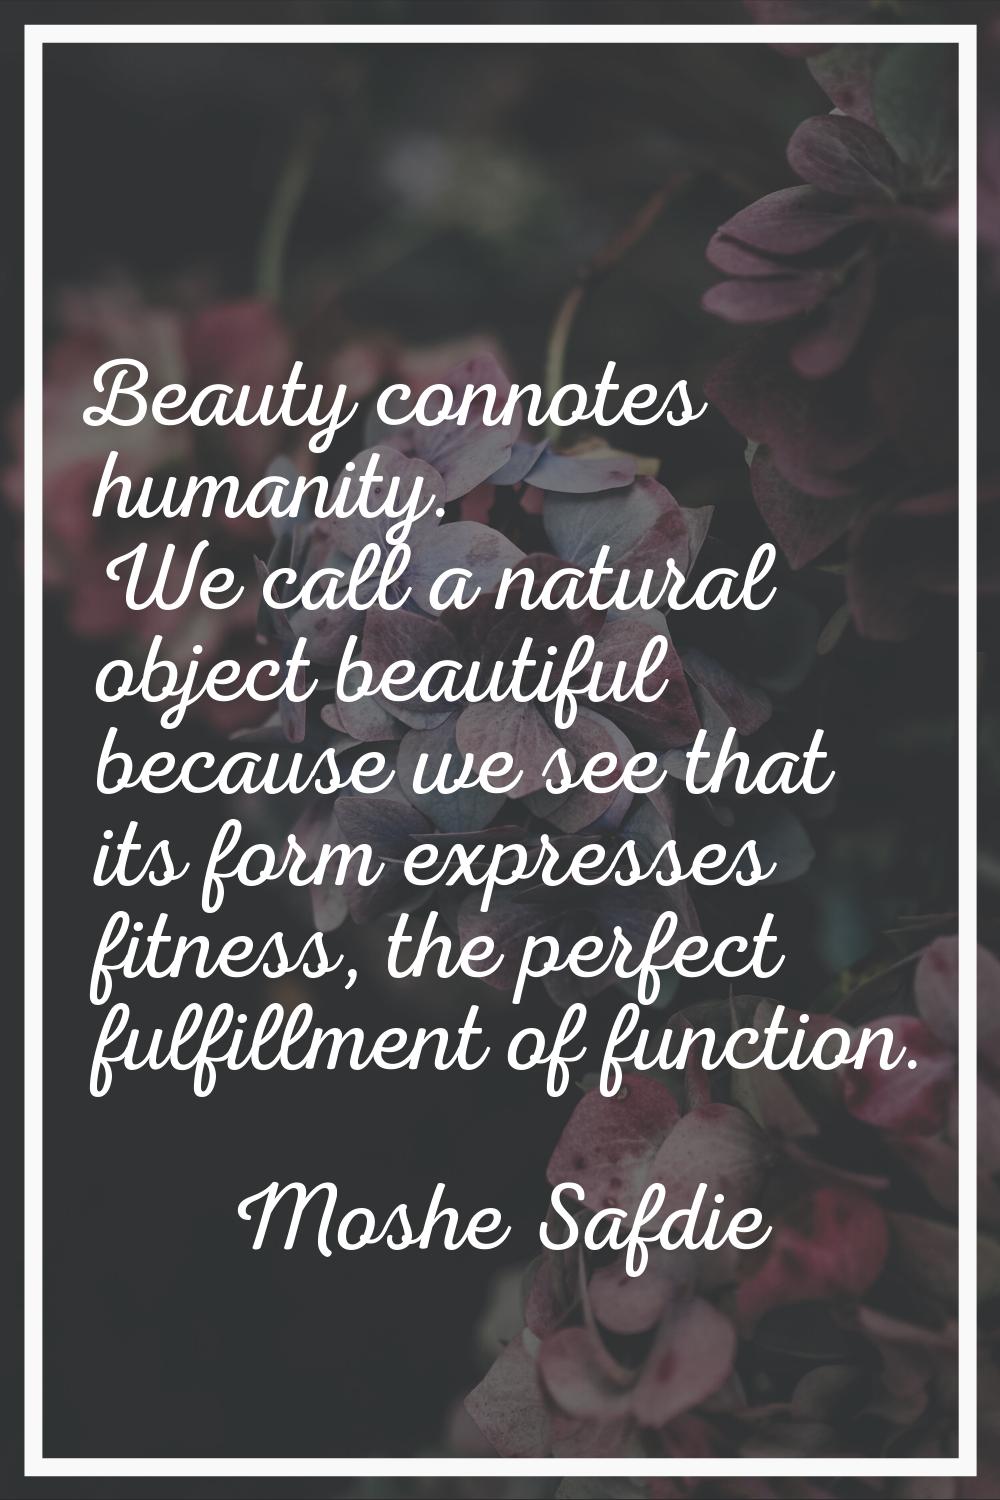 Beauty connotes humanity. We call a natural object beautiful because we see that its form expresses